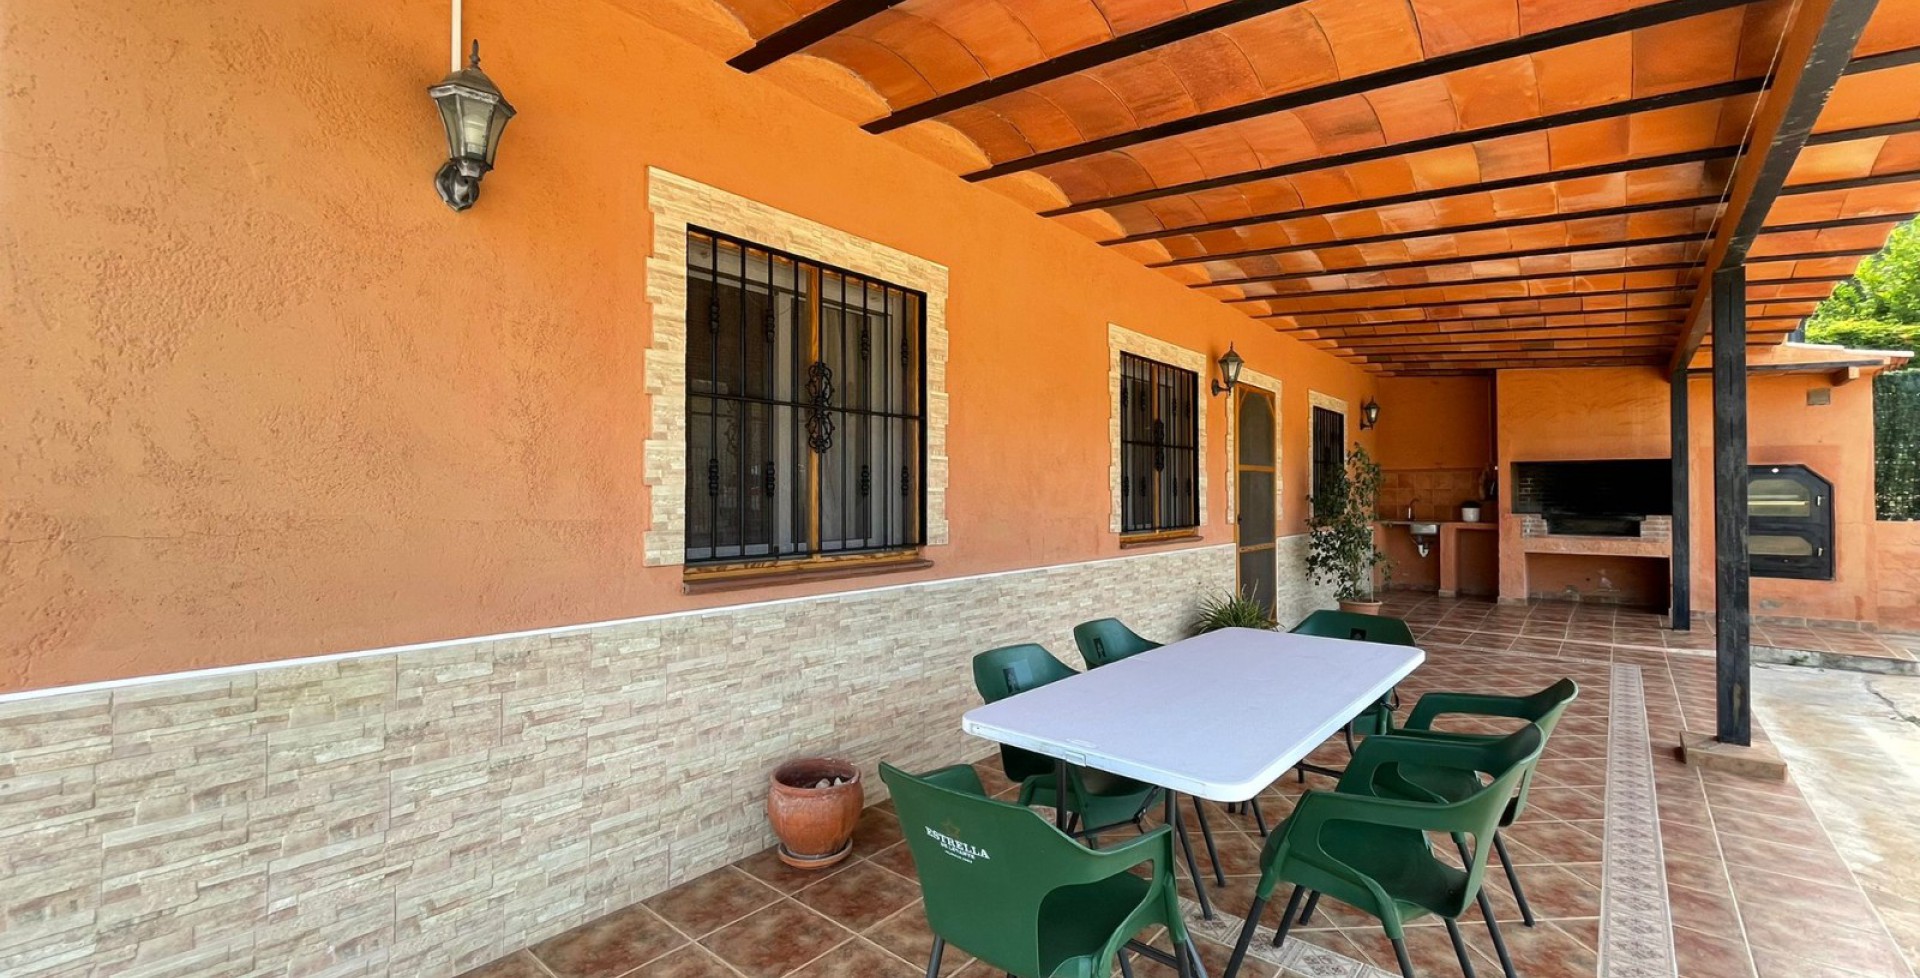 immaculate villa with a beatiful barbecue area